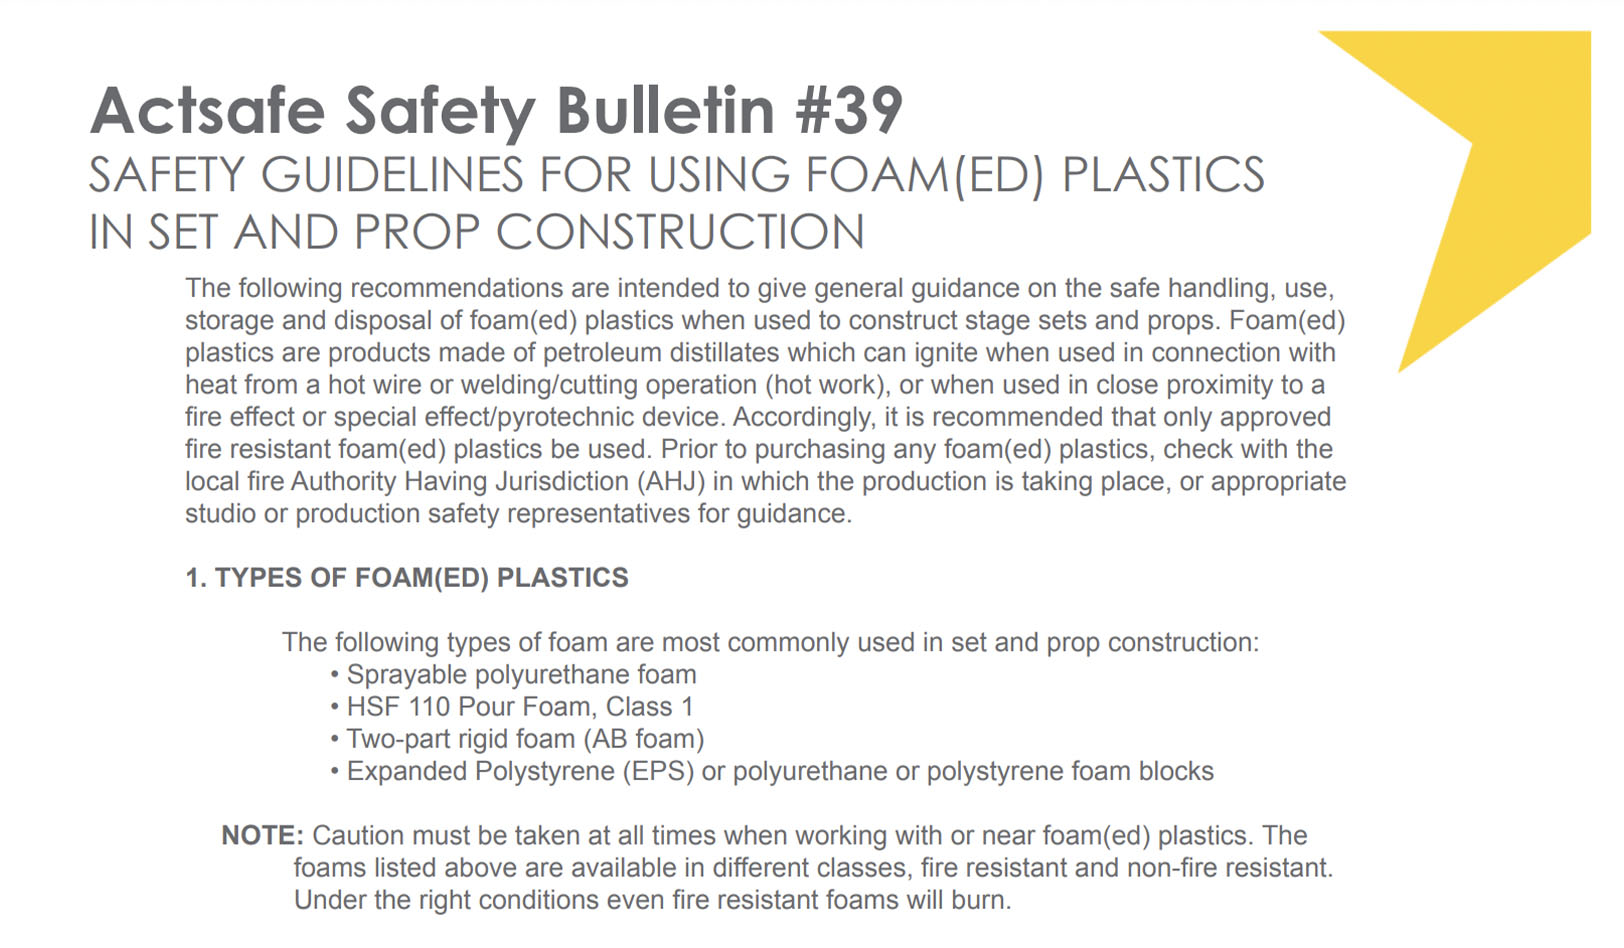 Foamed Plastics in Set and Prop Construction Motion Picture Safety Bulletin